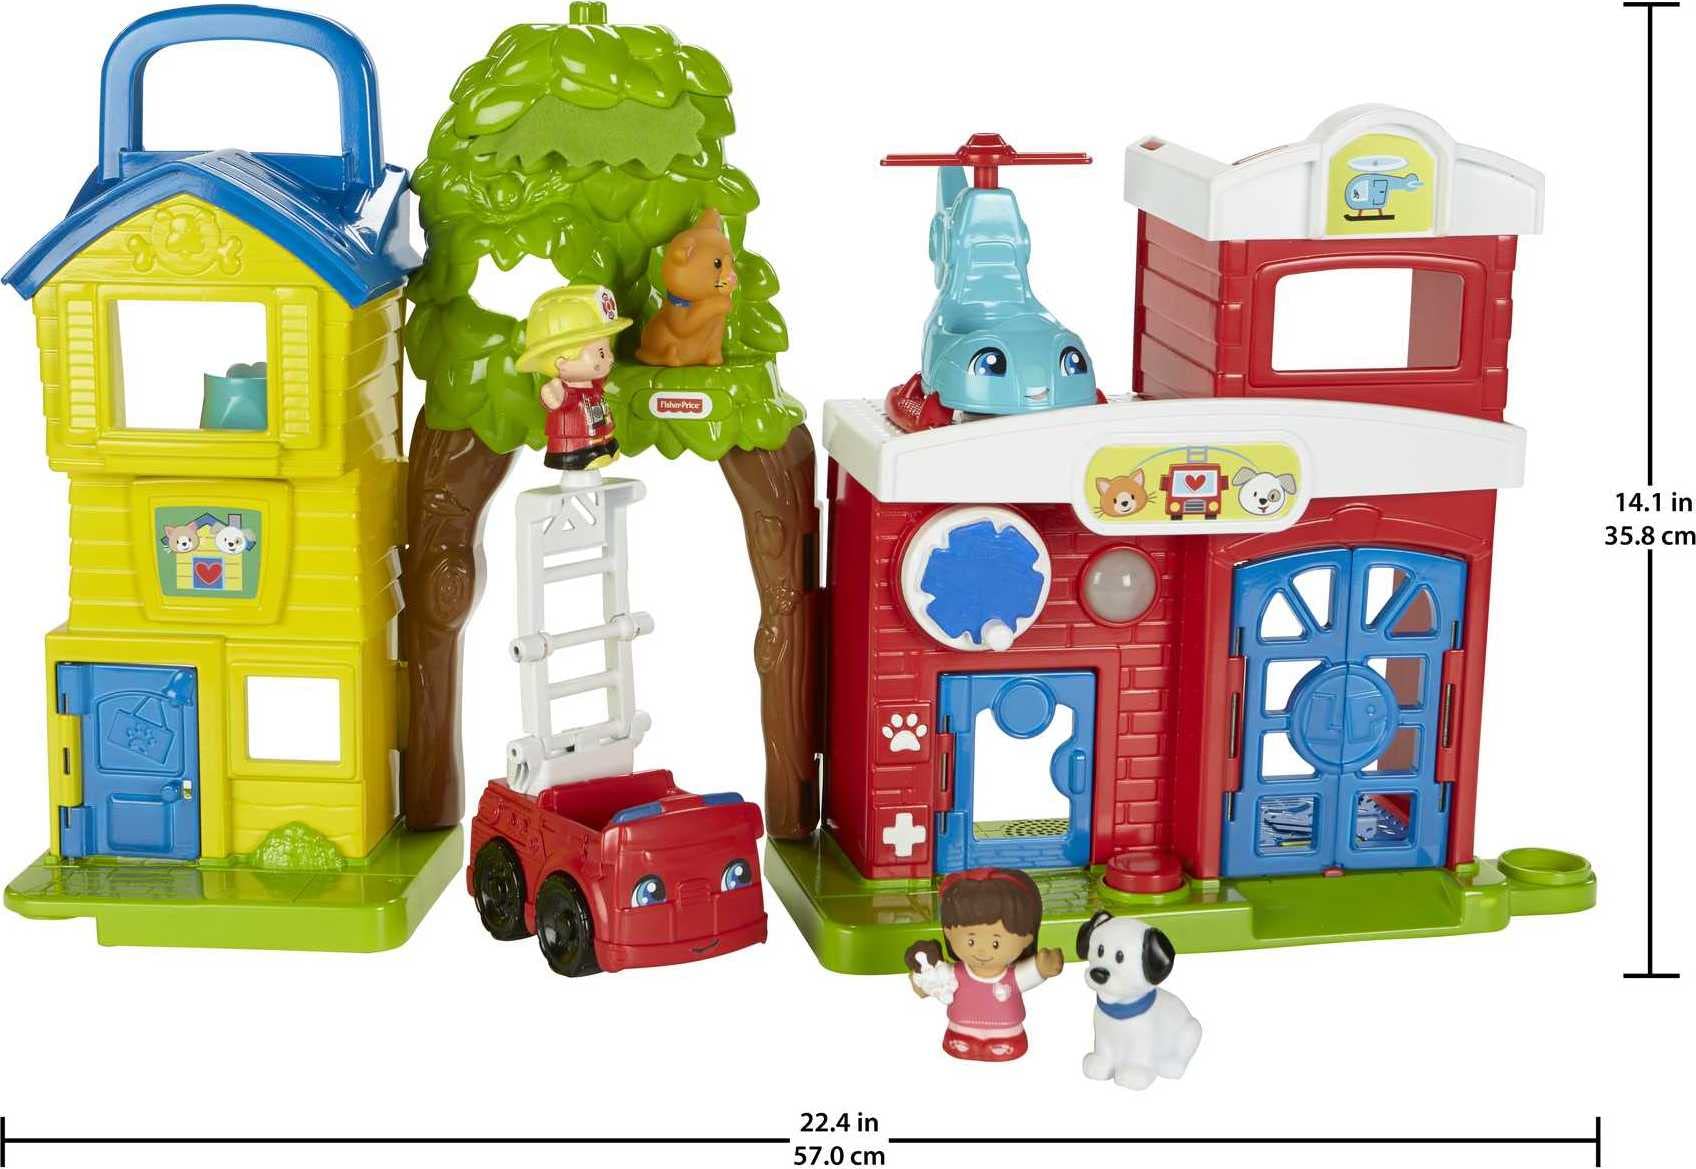 Fisher-Price Little People Toddler Toy Animal Rescue Playset with Lights Sounds Figures & Vehicles for Ages 1+ Years (Amazon Exclusive)